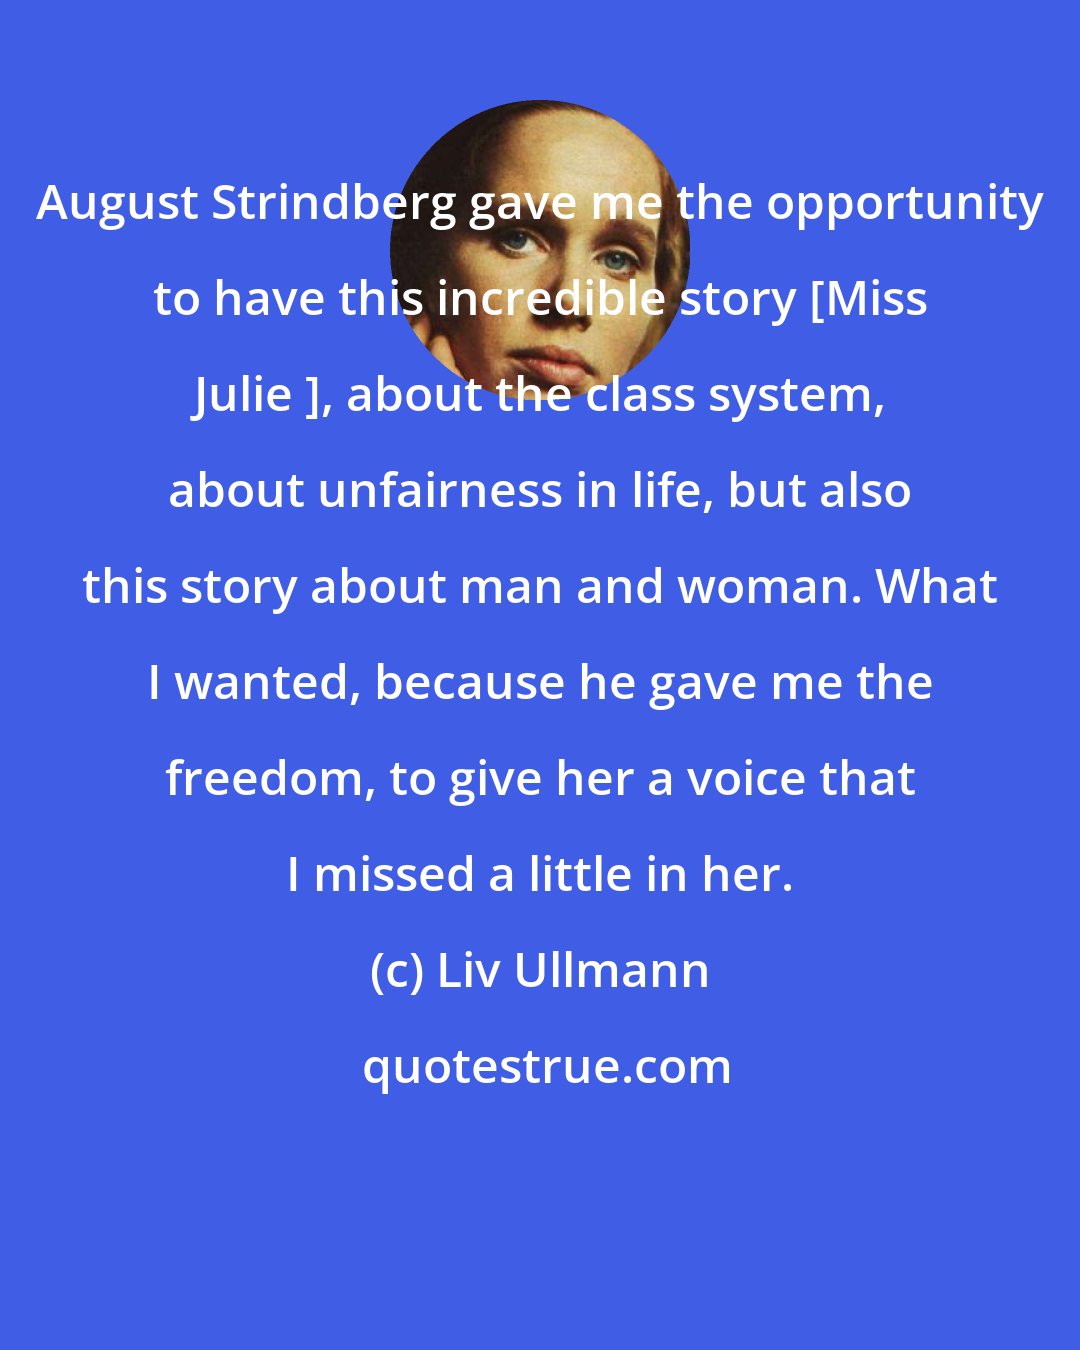 Liv Ullmann: August Strindberg gave me the opportunity to have this incredible story [Miss Julie ], about the class system, about unfairness in life, but also this story about man and woman. What I wanted, because he gave me the freedom, to give her a voice that I missed a little in her.